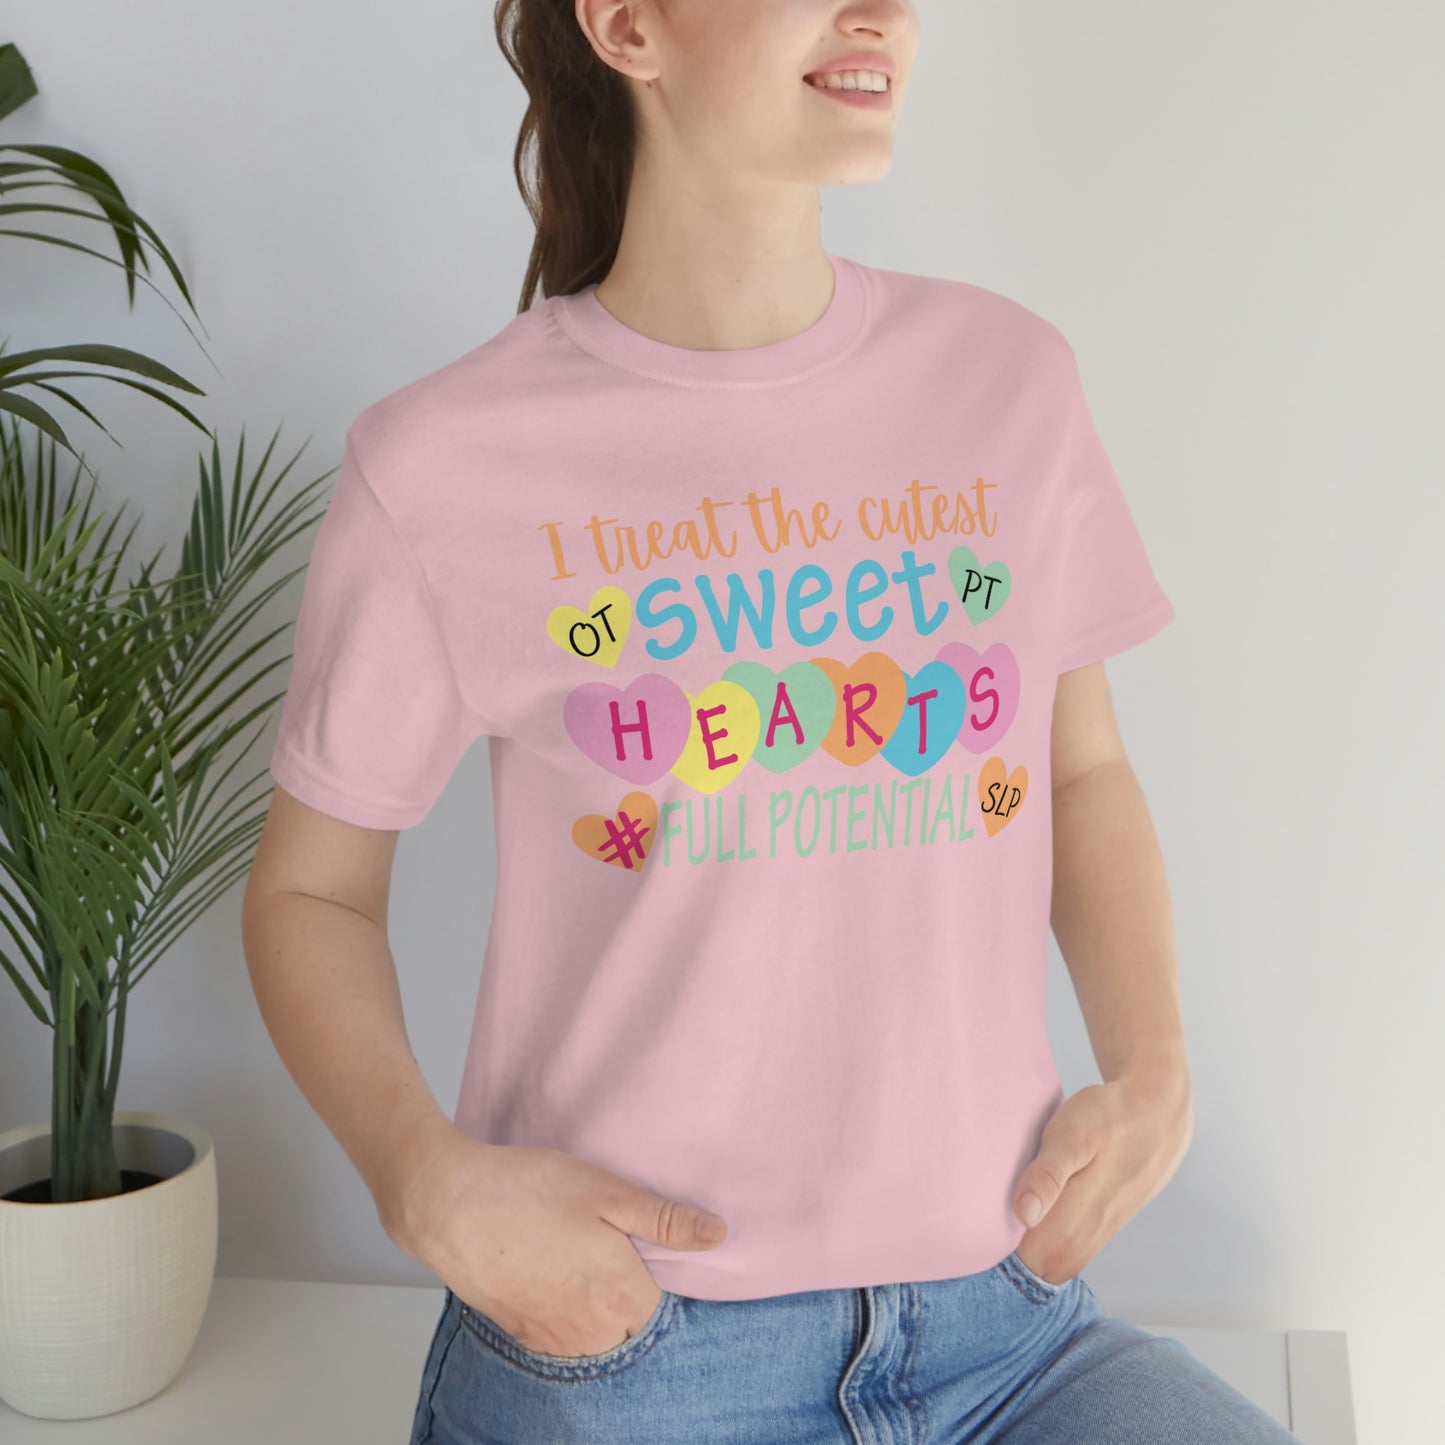 I Treat The Cutest Sweet Hearts At Full Potential Therapy Shirt